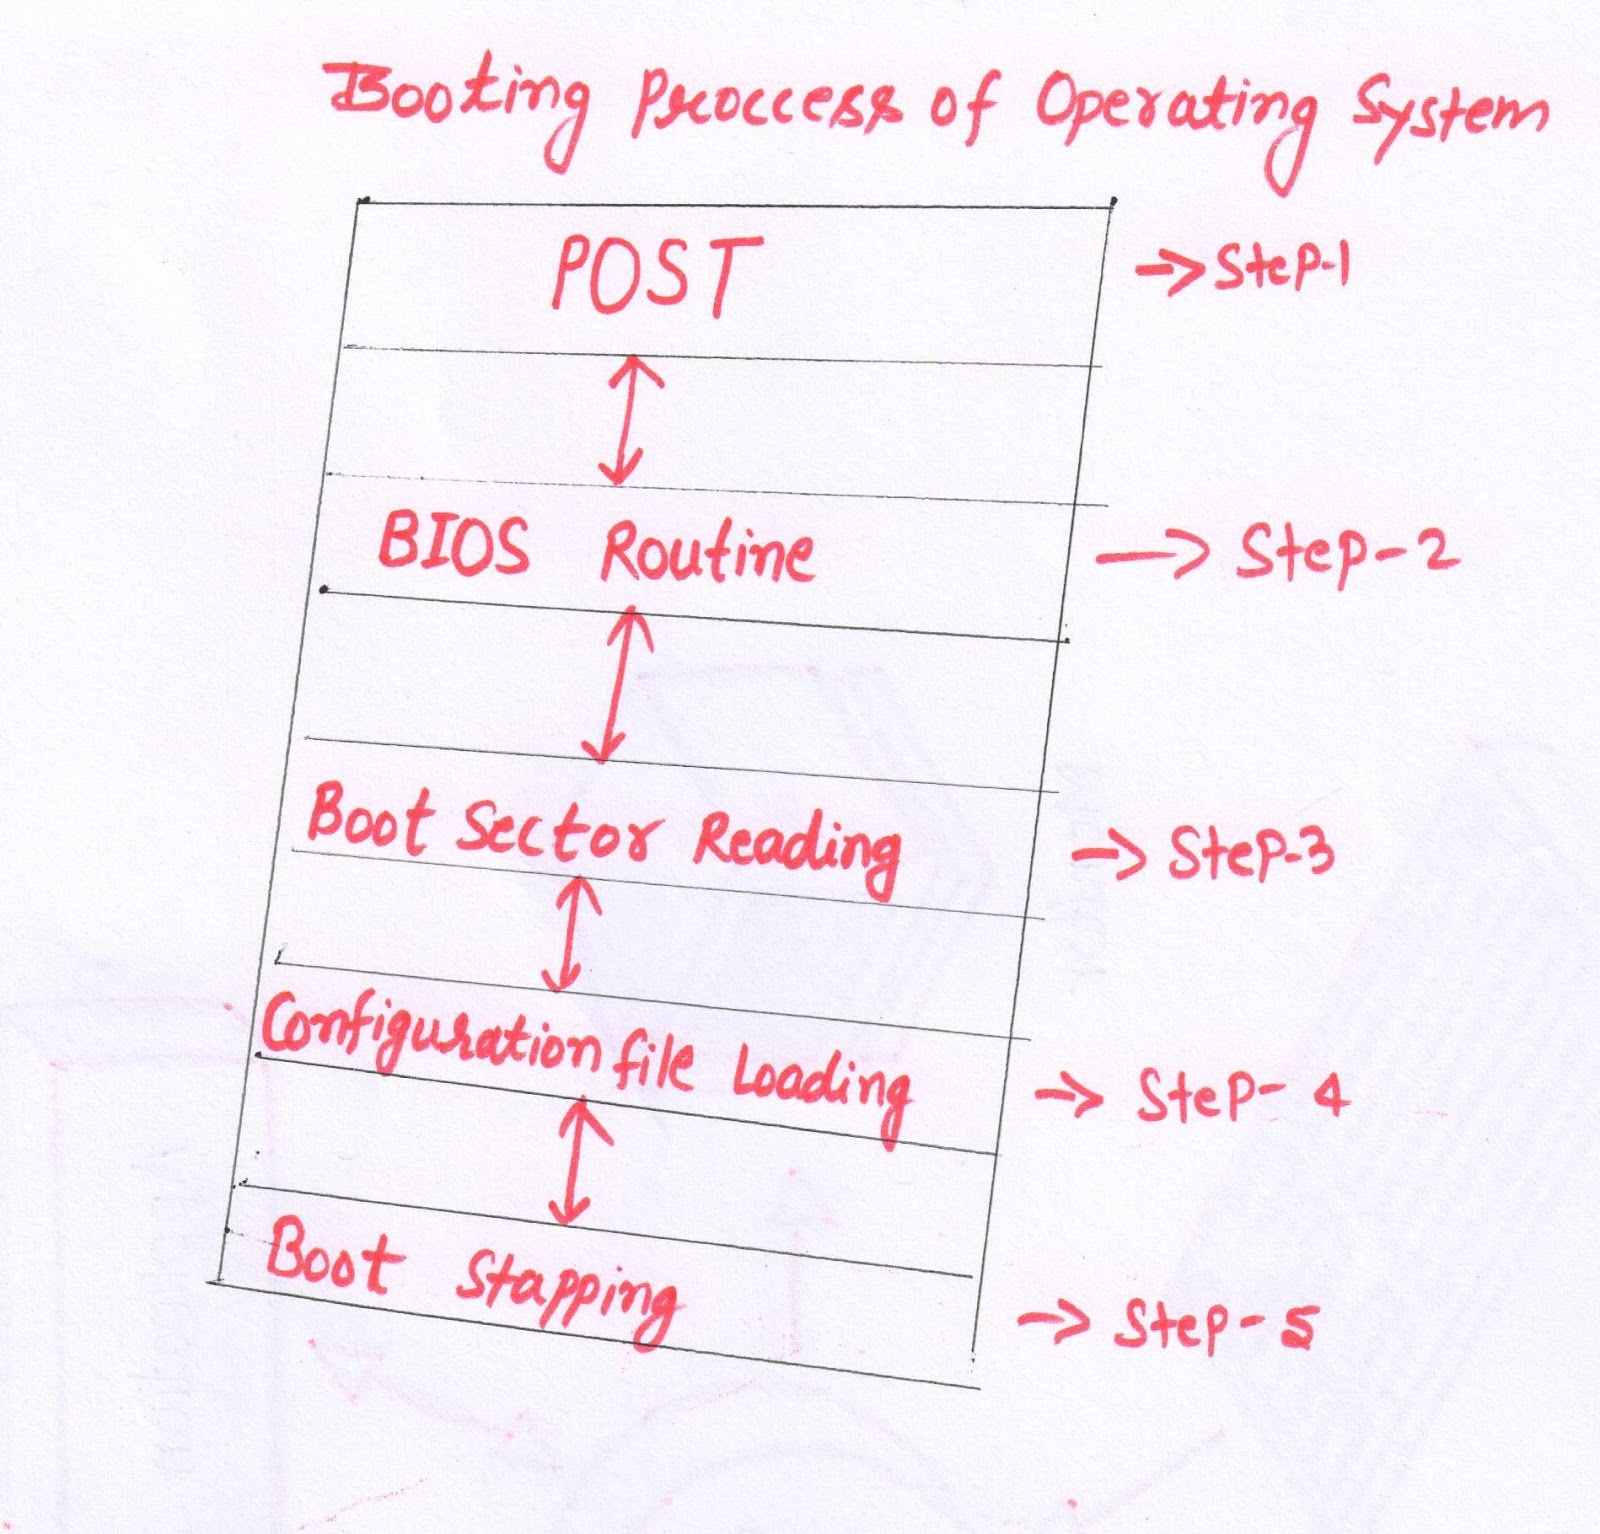 Booting Process of Operating System